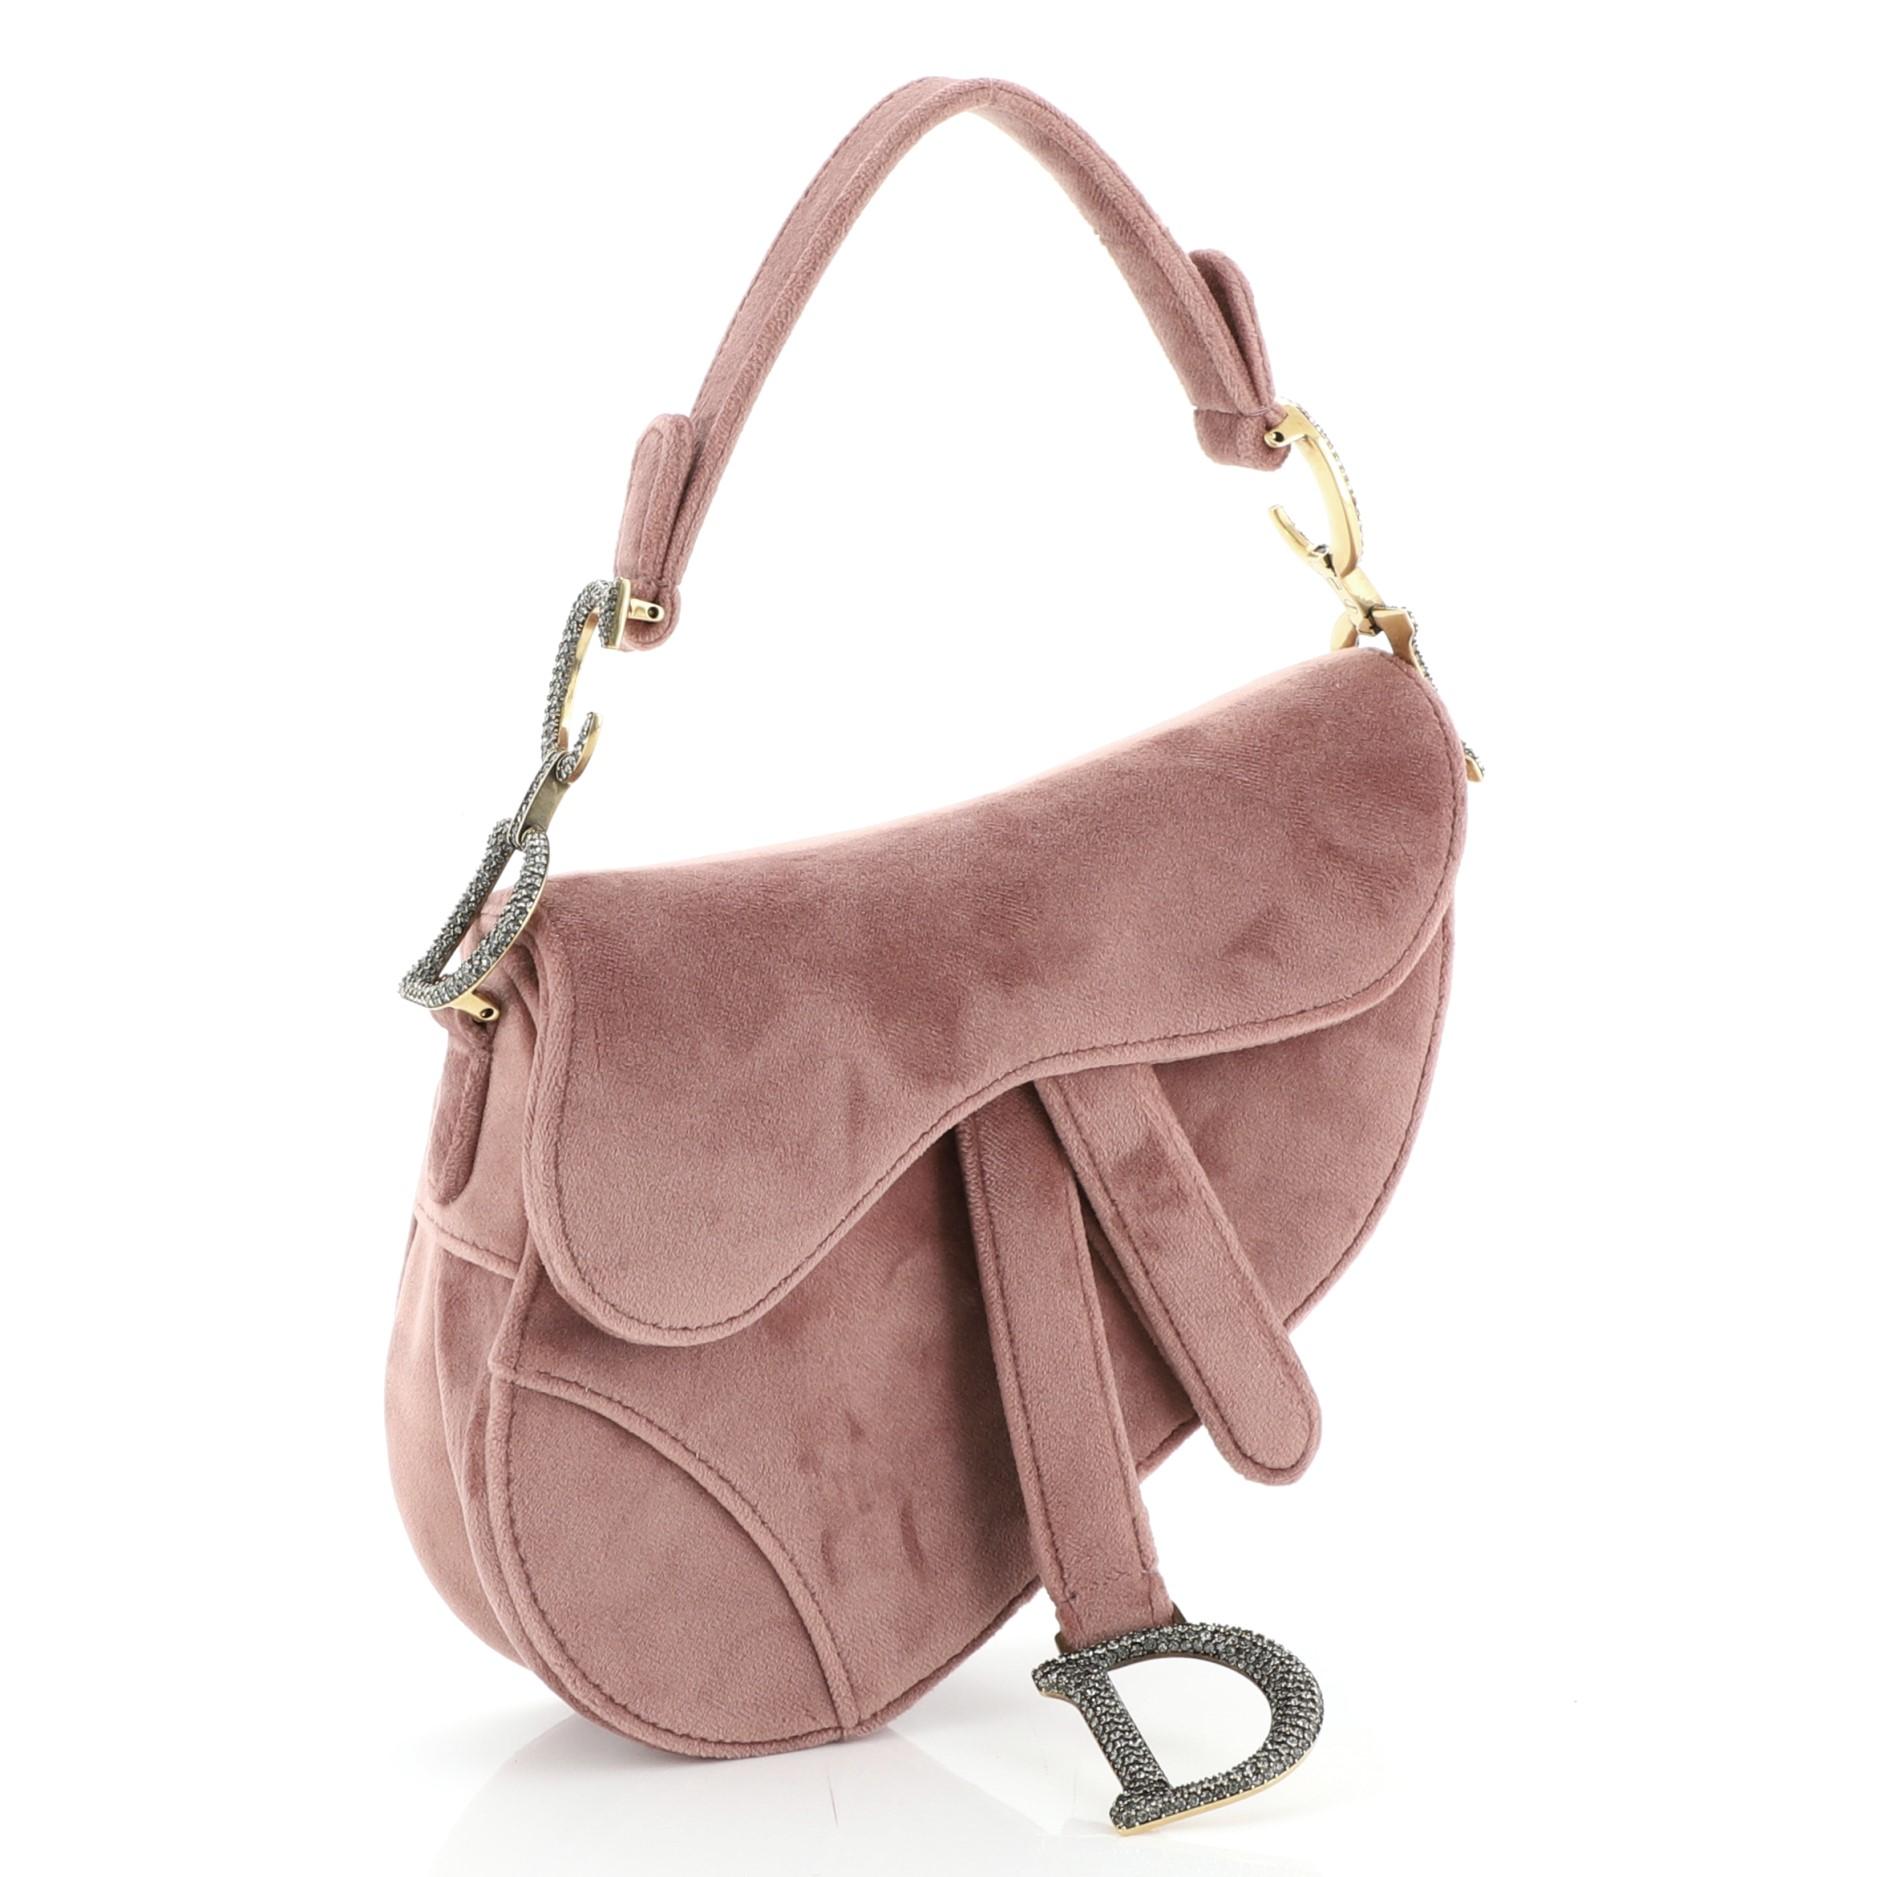 This Christian Dior Saddle Handbag Velvet with Crystals Mini, crafted from pink velvet, features a top handle adorned with metal 'CD' hardware and aged gold-tone hardware. Its fold over top opens to a pink suede interior with zip pocket. 

Estimated